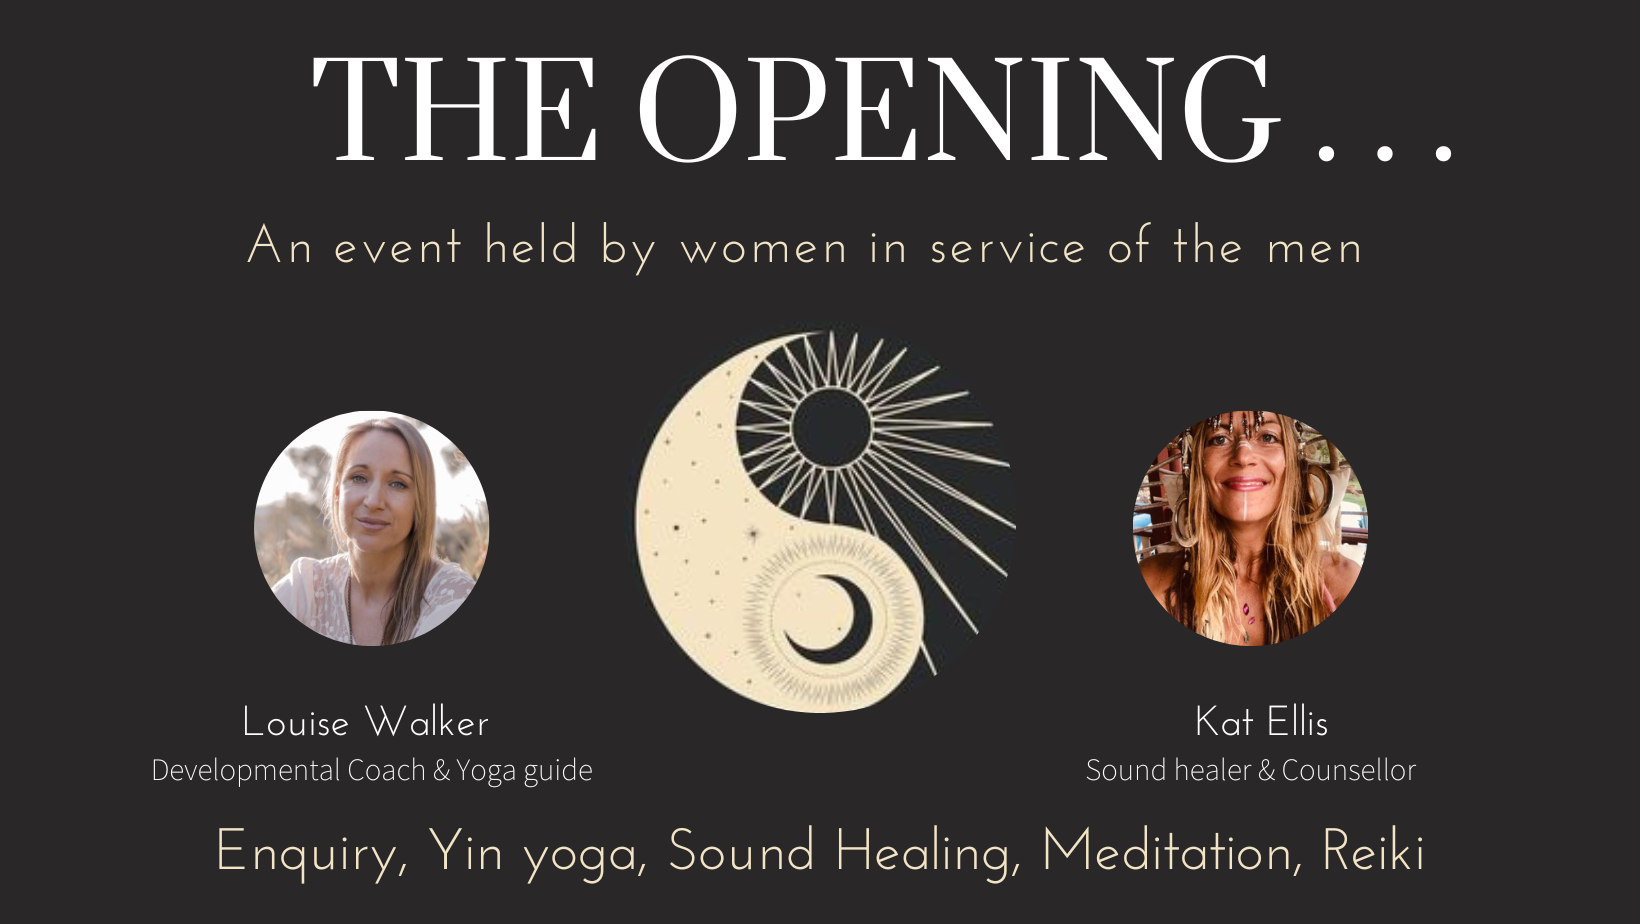 Fri Oct 7th - "The Opening" - Created for The Men - Evening Event with Louise and Kat